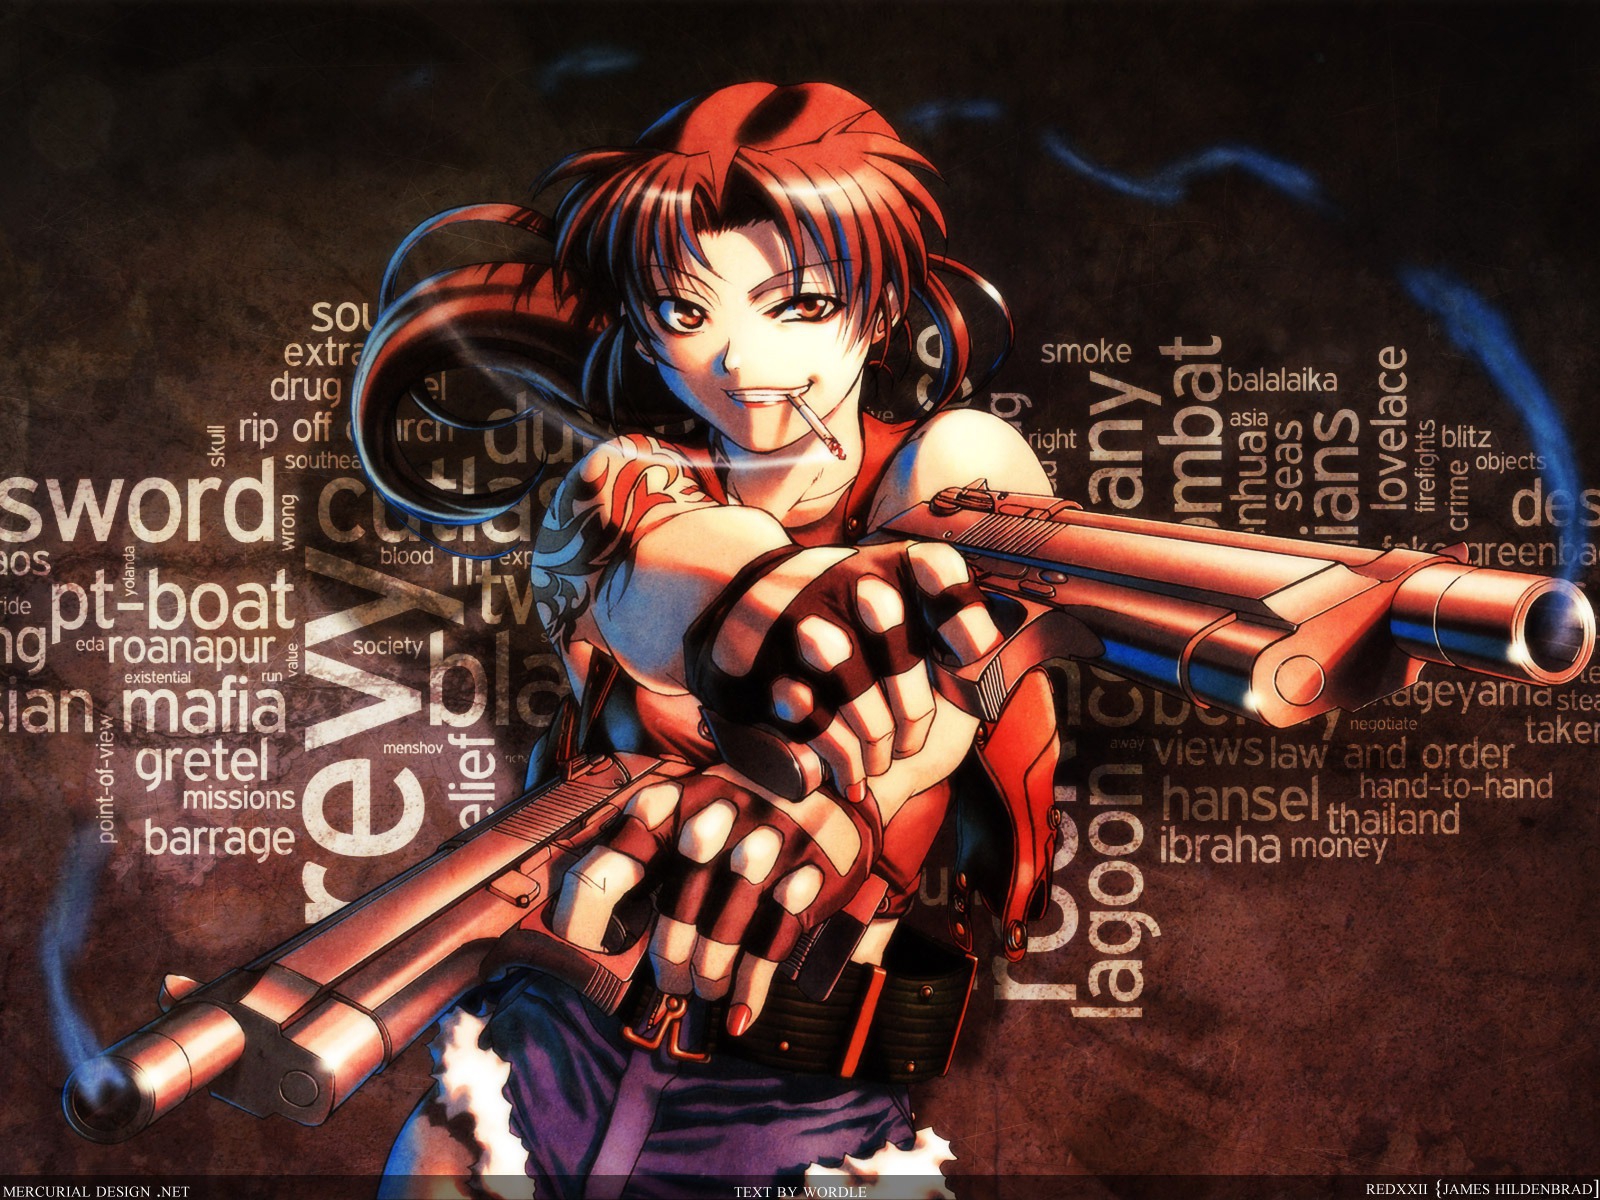 Revy, a character from the Anime series Black Lagoon, exudes confidence and intensity.